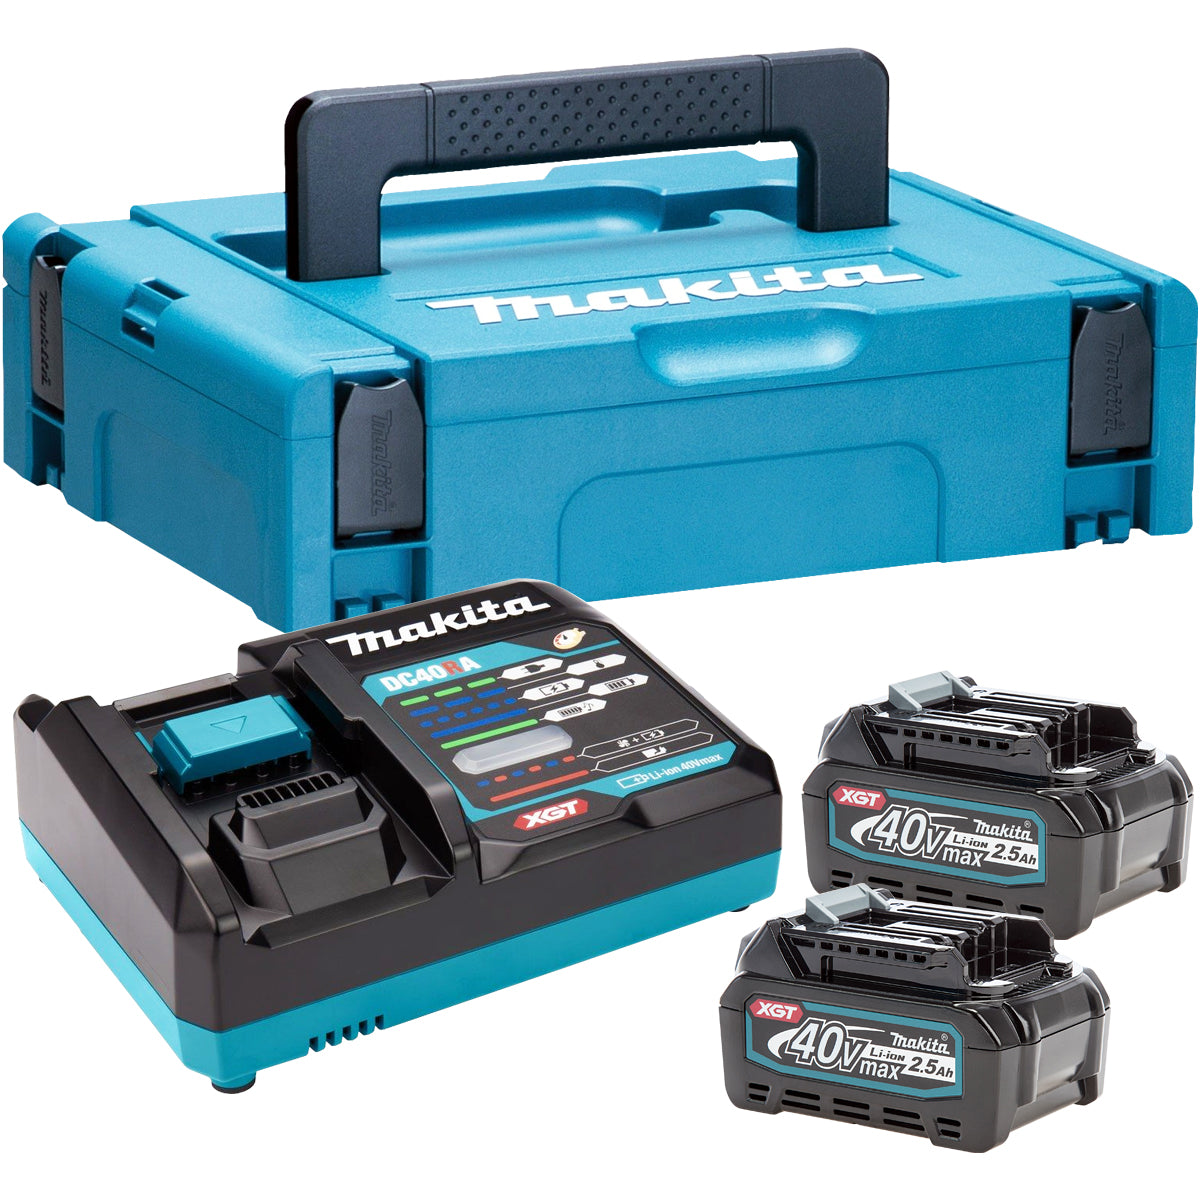 Makita 191J85-8 40V Max XGT Power Source Kit 240V With 2 x 2.5Ah BL4025 Batteries, Charger & Case